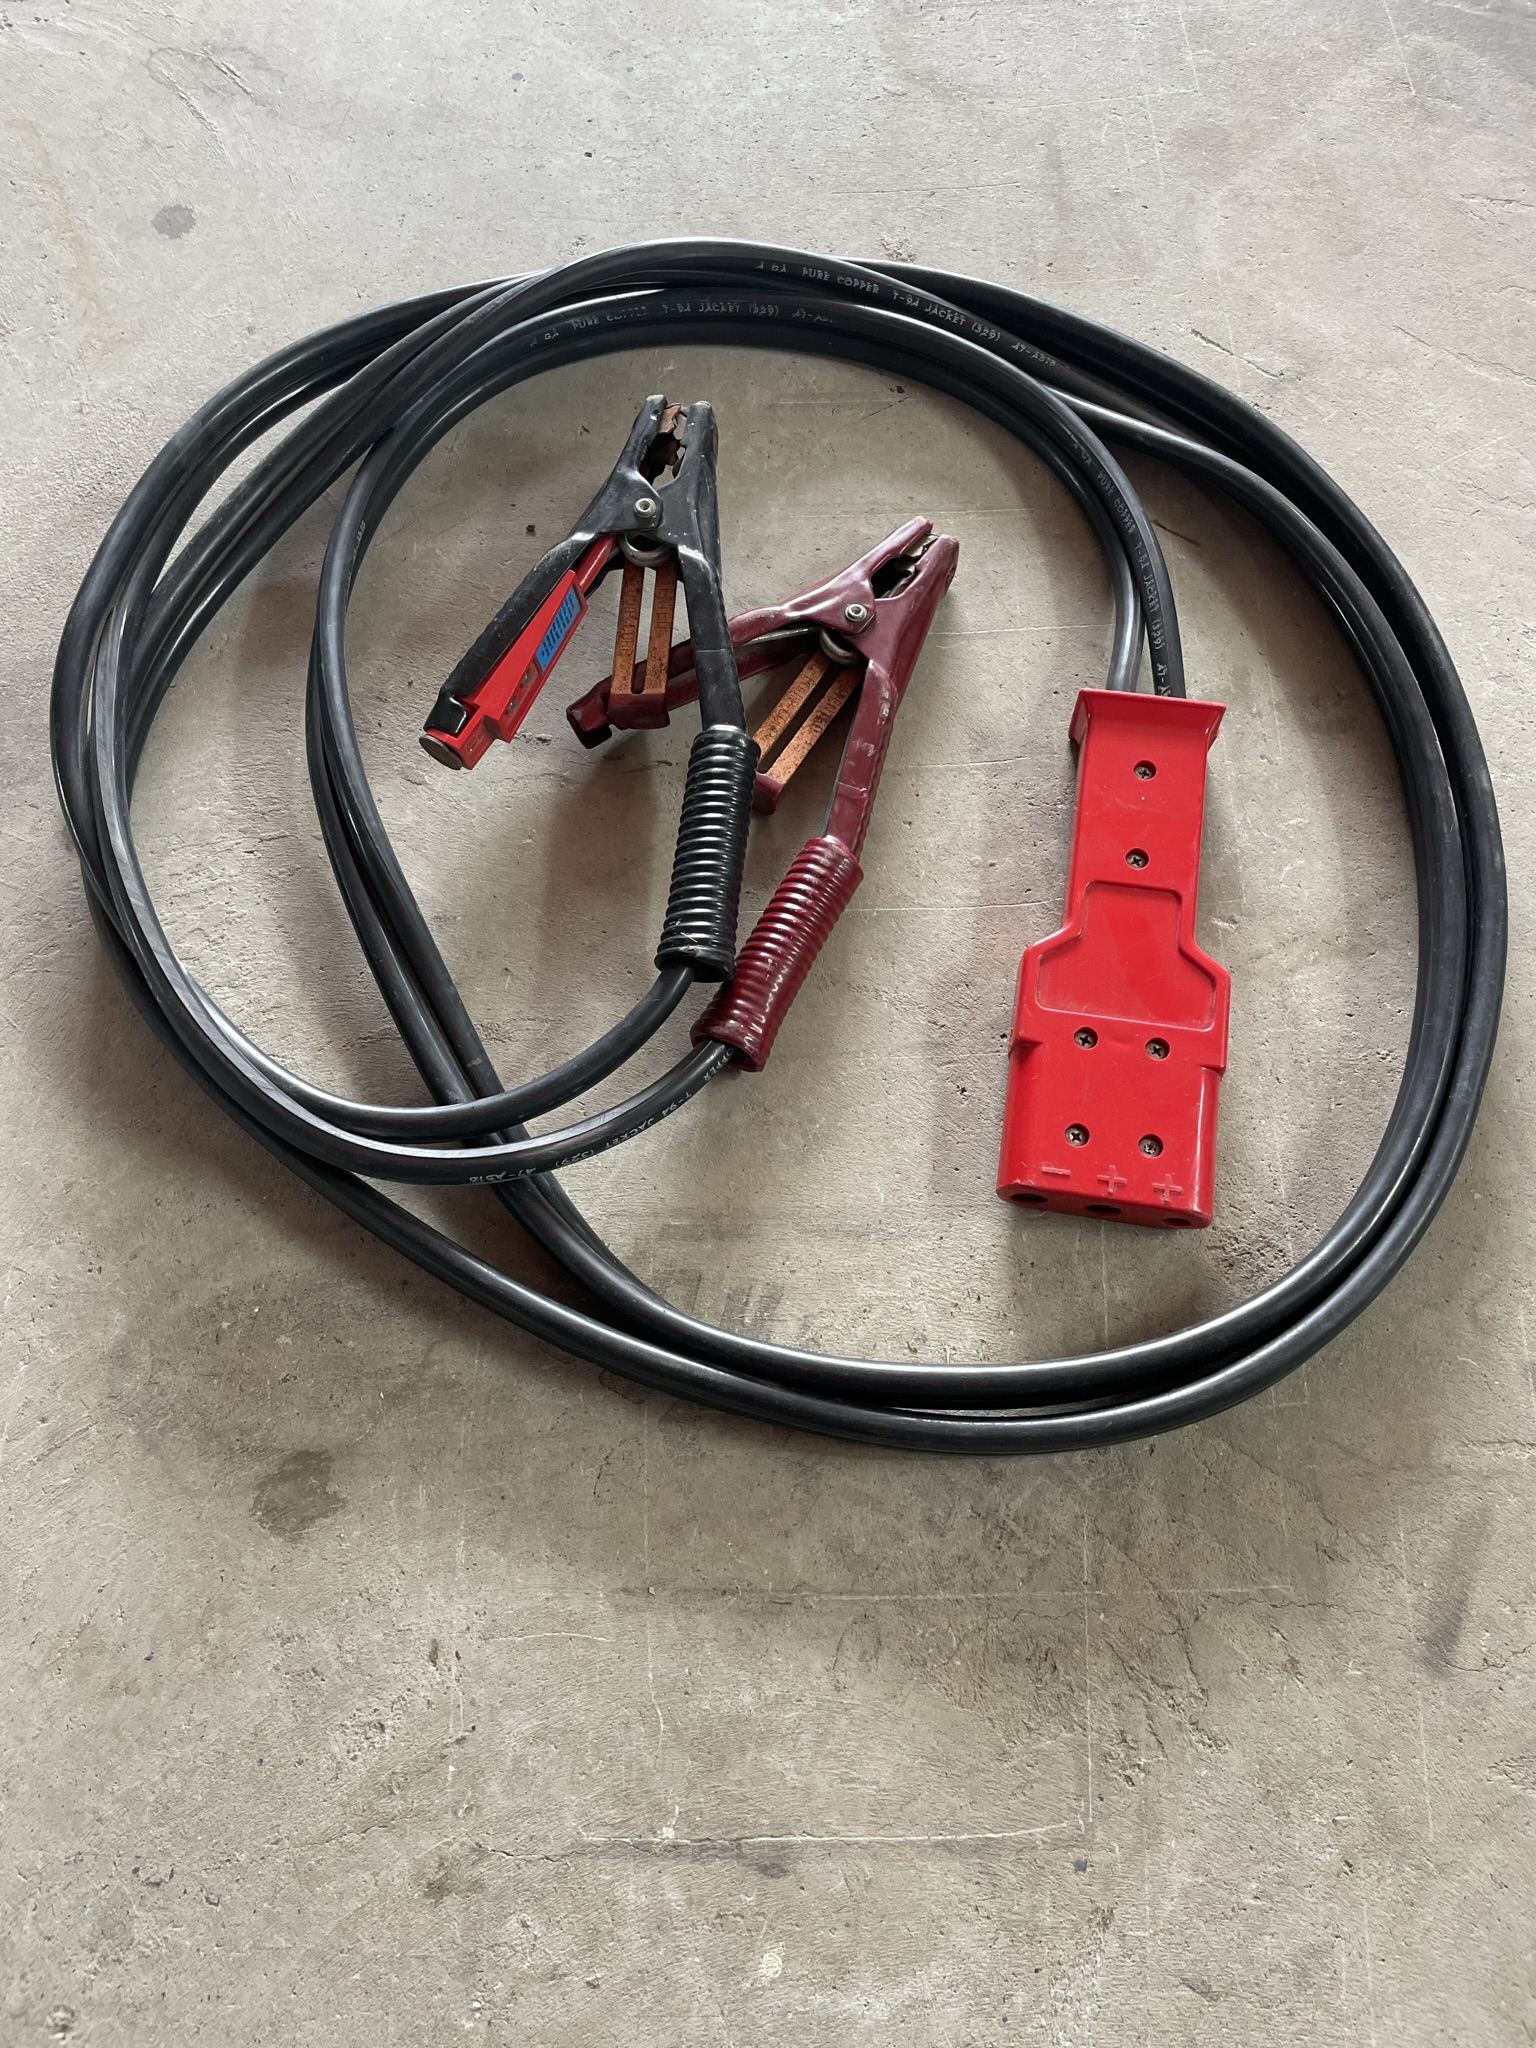 Booster cable